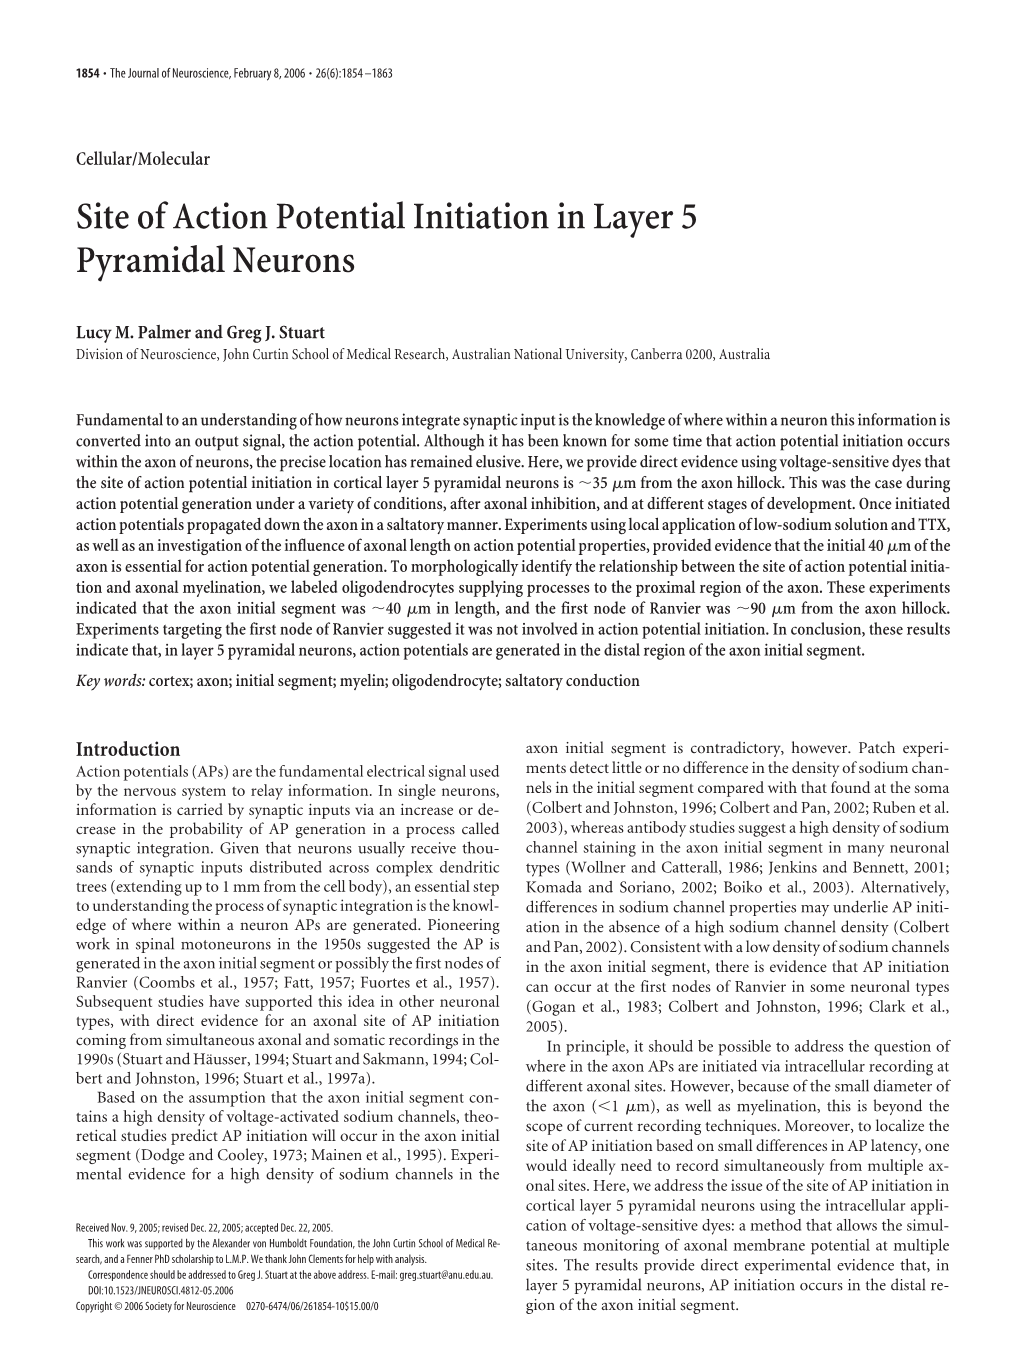 Site of Action Potential Initiation in Layer 5 Pyramidal Neurons